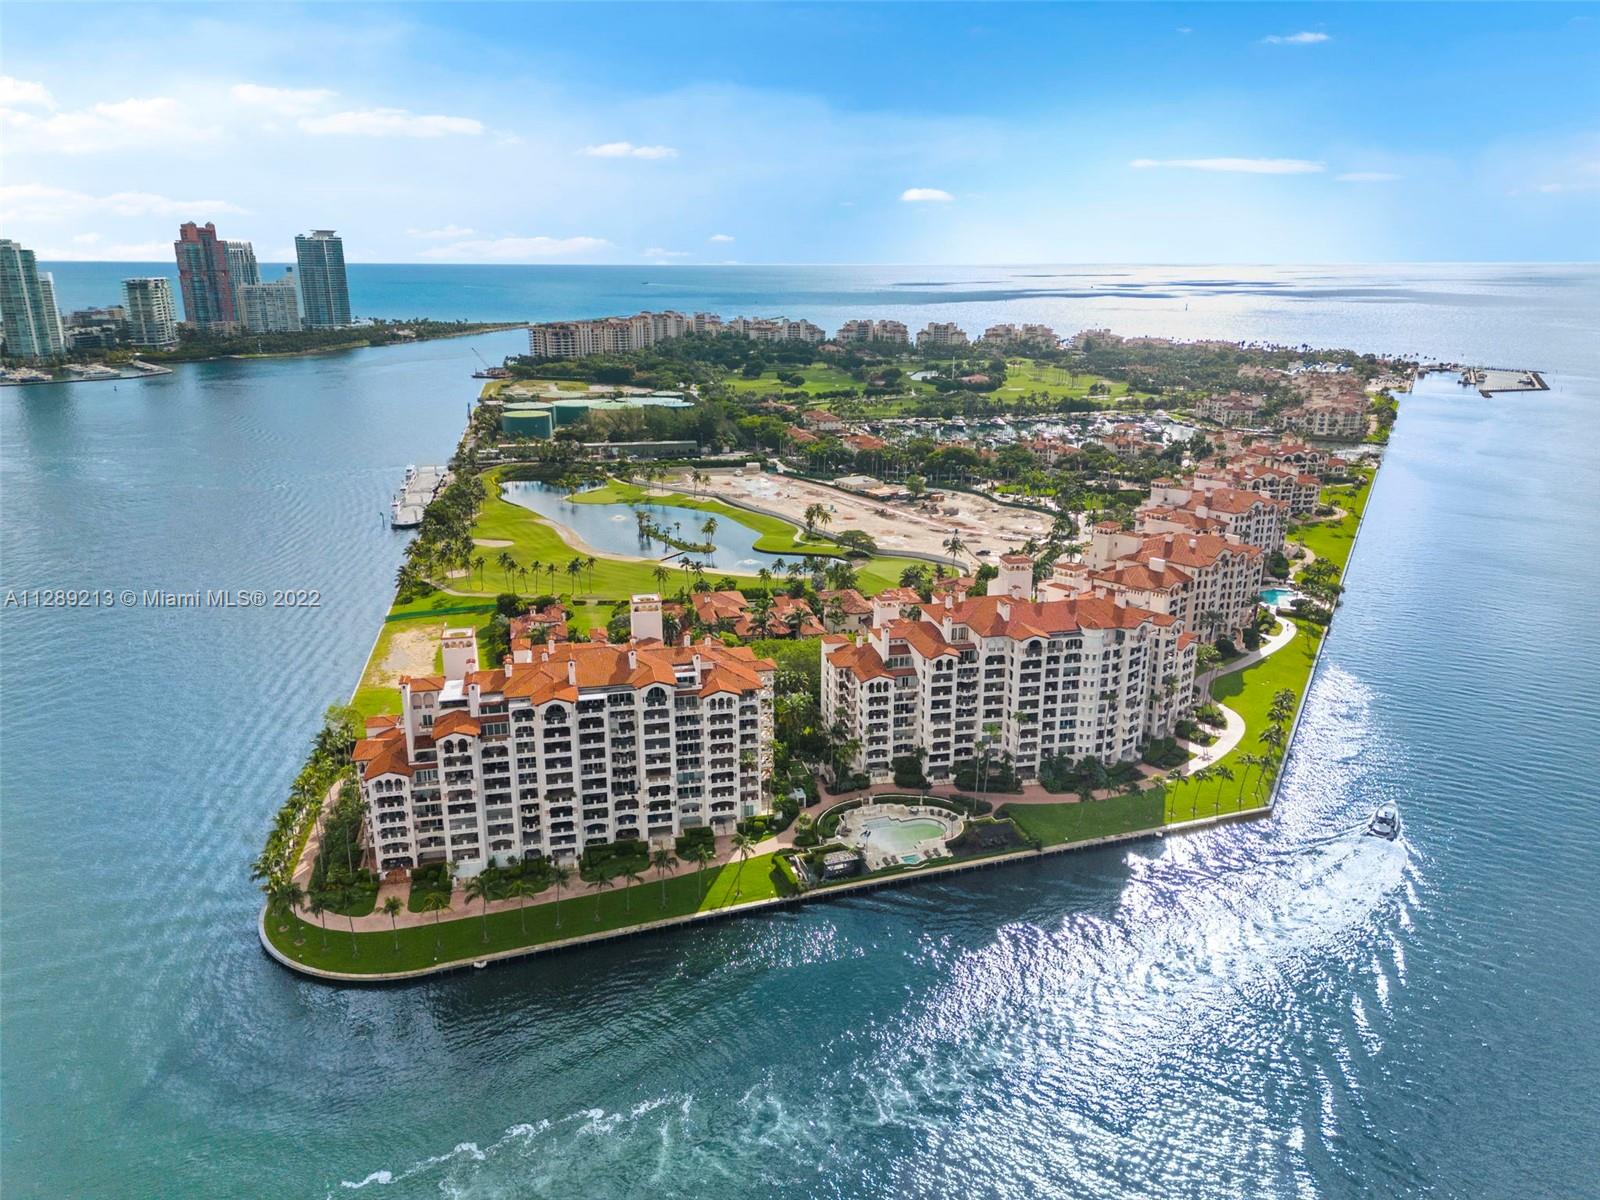 Welcome to the Fisher Island Lifestyle! Step inside this 2nd story corner unit, with breathtaking water views of Biscayne bay and the Downtown Miami skyline. This large 3 bedroom, 3.5 bathroom condo is spread across 2,740 square feet of living space with expansive wraparound terraces. Loads of natural light and balconies off of every room. Here is your chance to live in the ultra-private tropical residential community of Fisher Island!